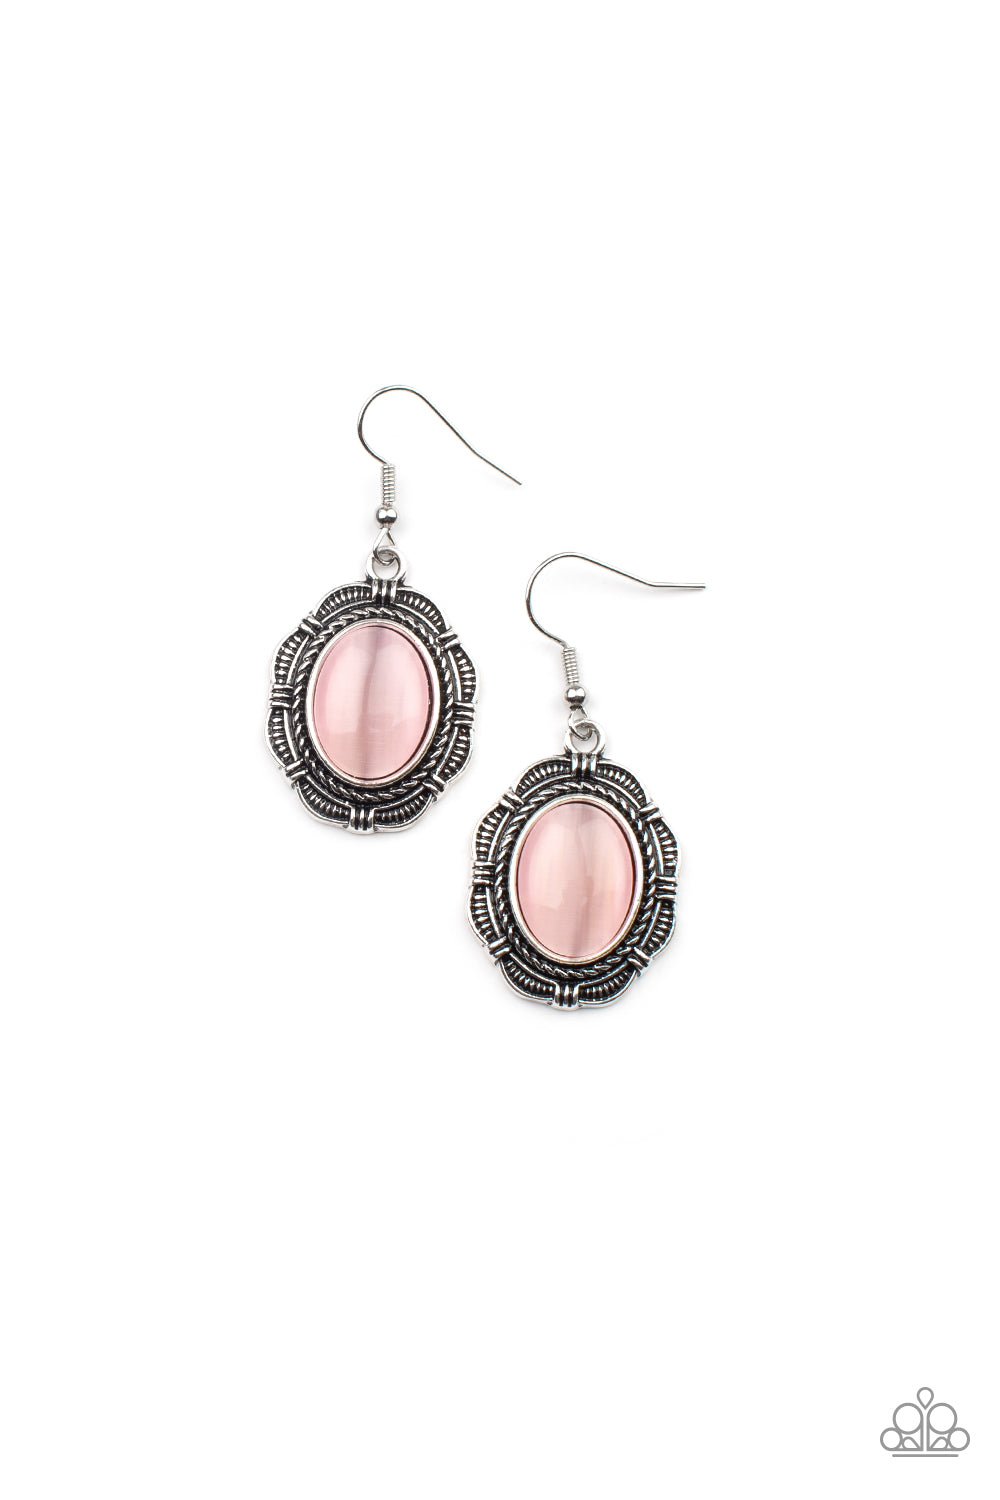 Garden Party Perfection Paparazzi Accessories Earrings - Pink